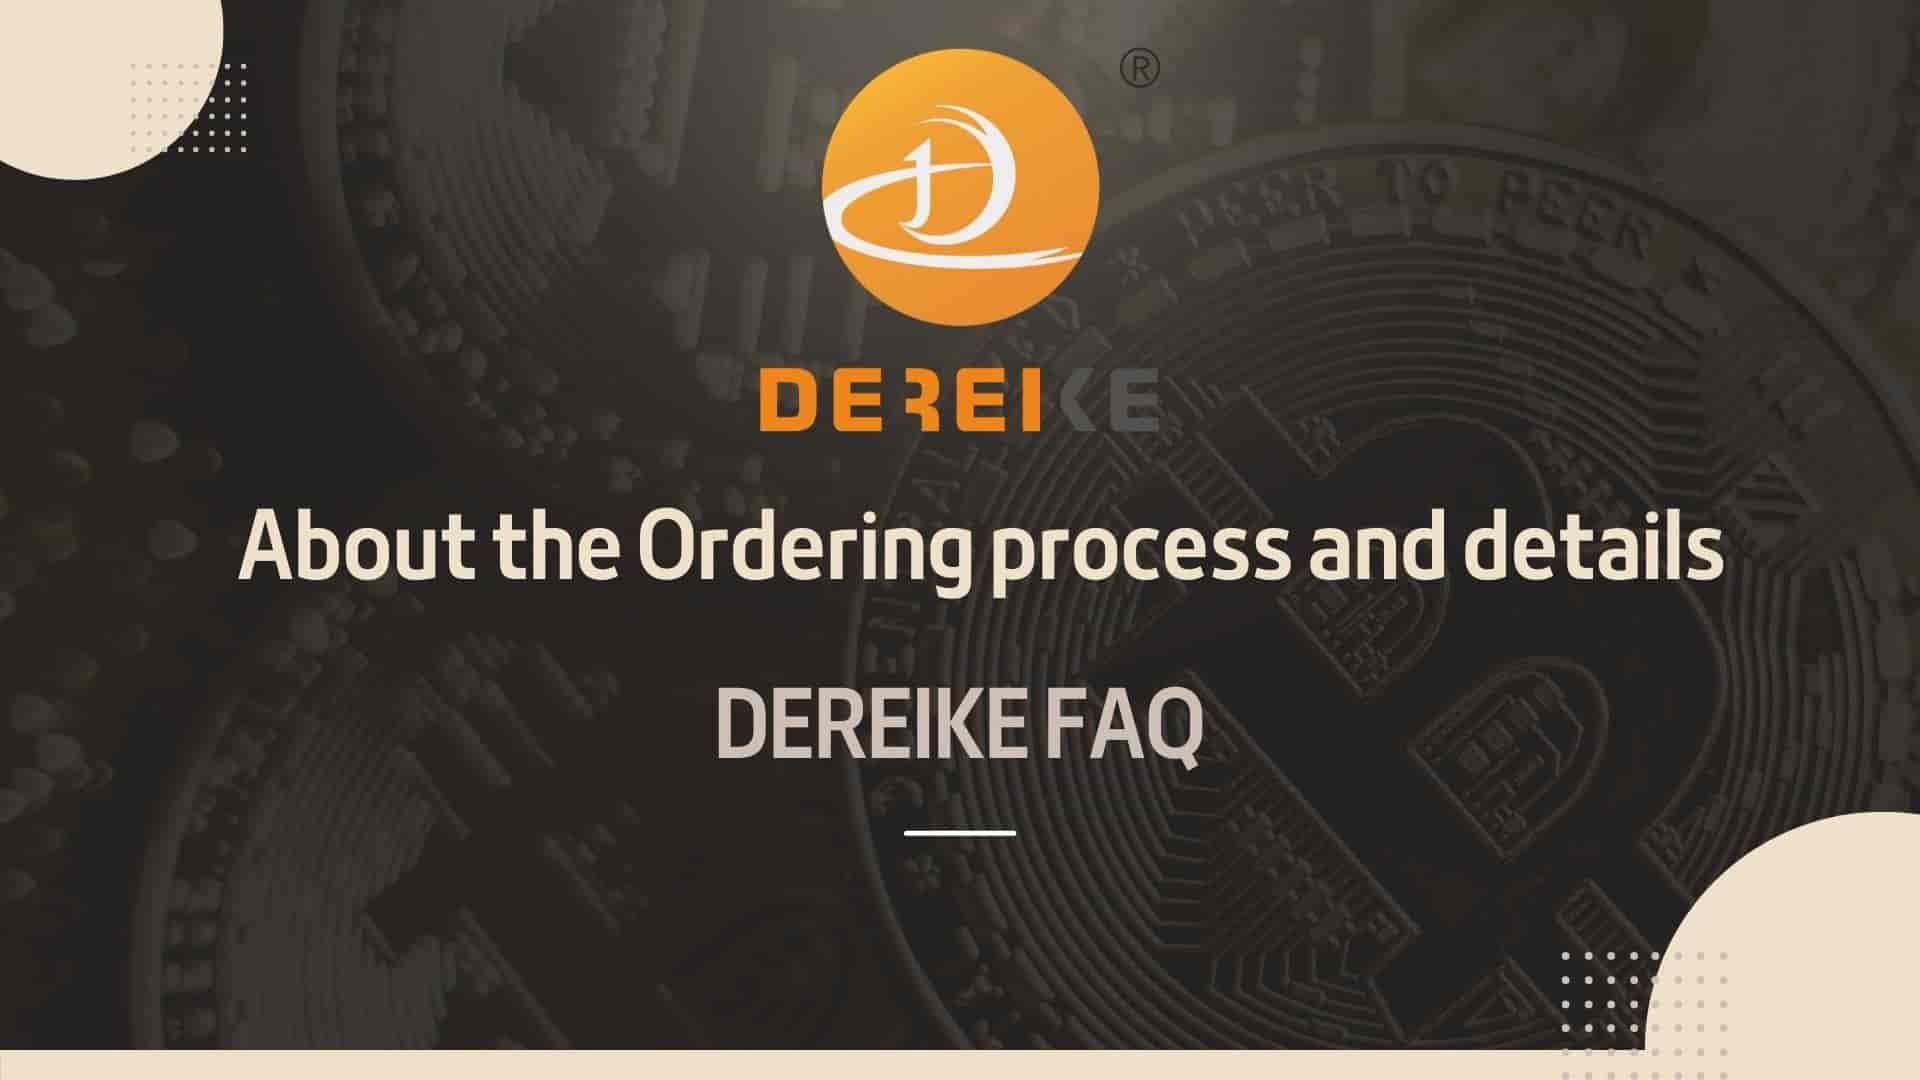 About the Ordering process and details